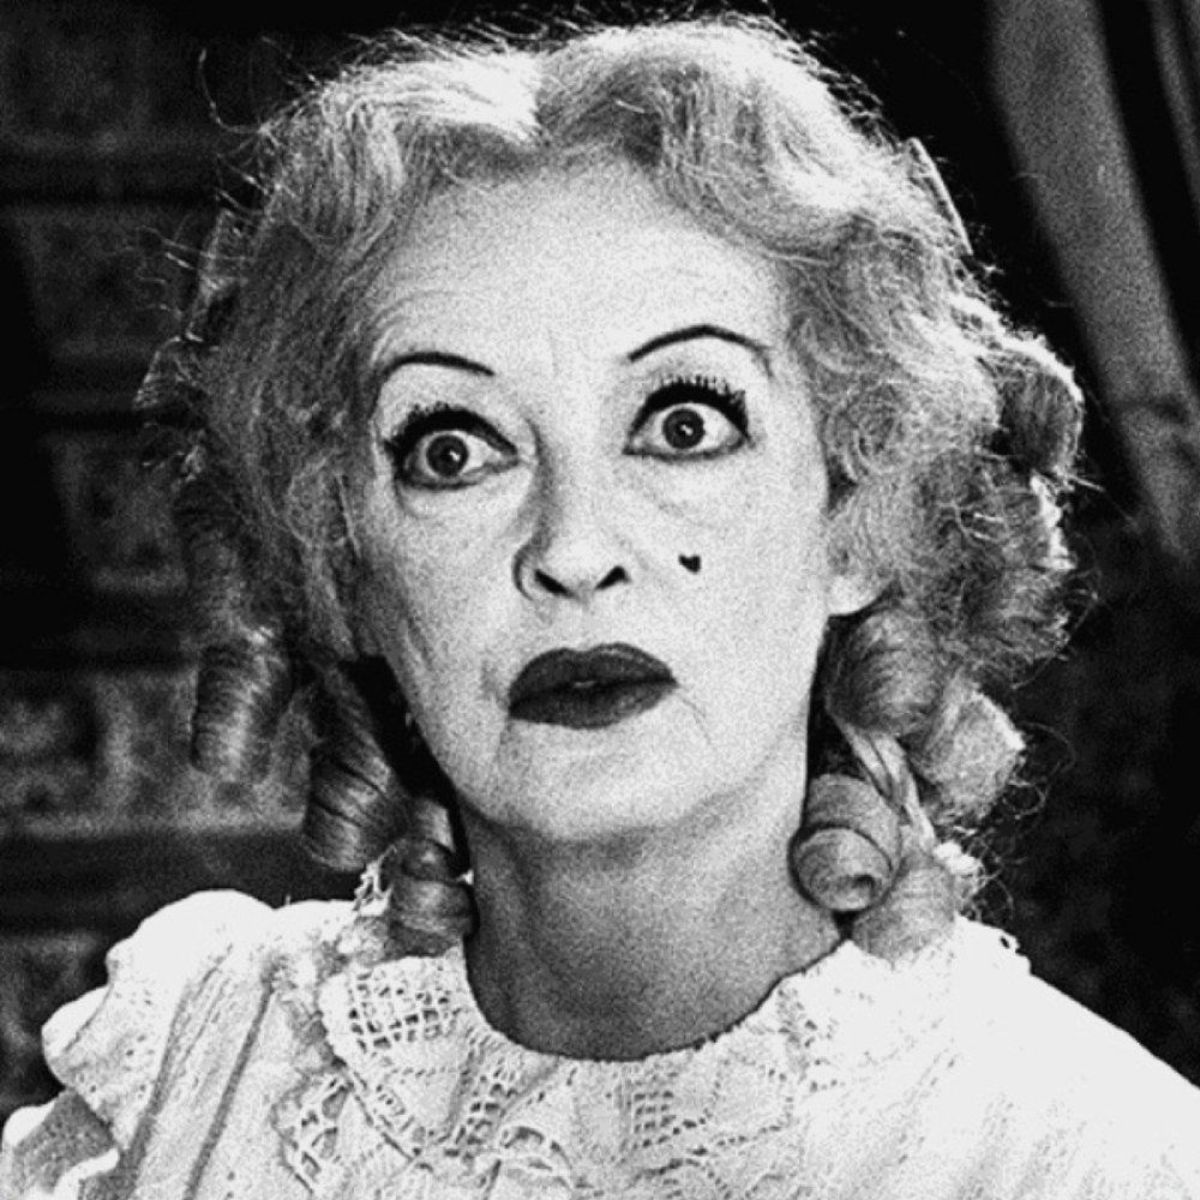 In 1962, What Ever Happened to Baby Jane?—a horror movie starring Bette Davis and Joan Crawford—was one of the most popular films.